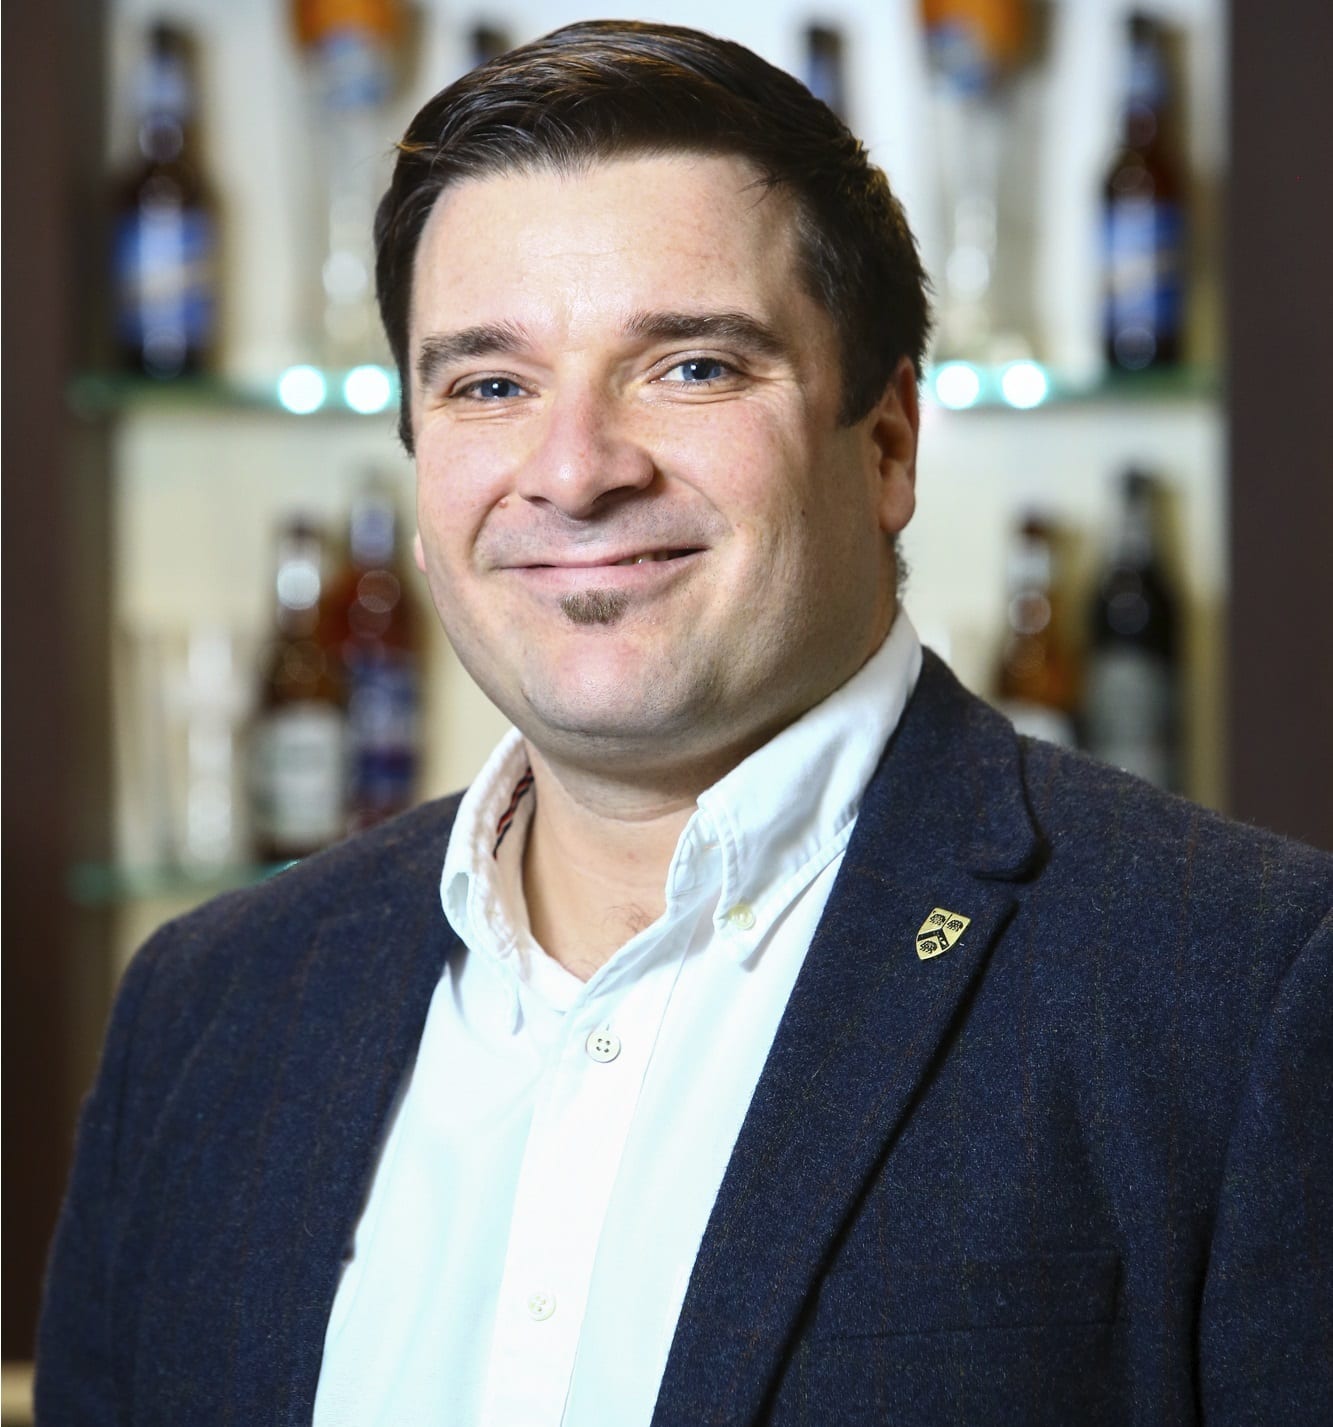 Molson Coors' new country manager for Ireland, Ryan McFarland, is a veteran of the alcoholic beverage industry